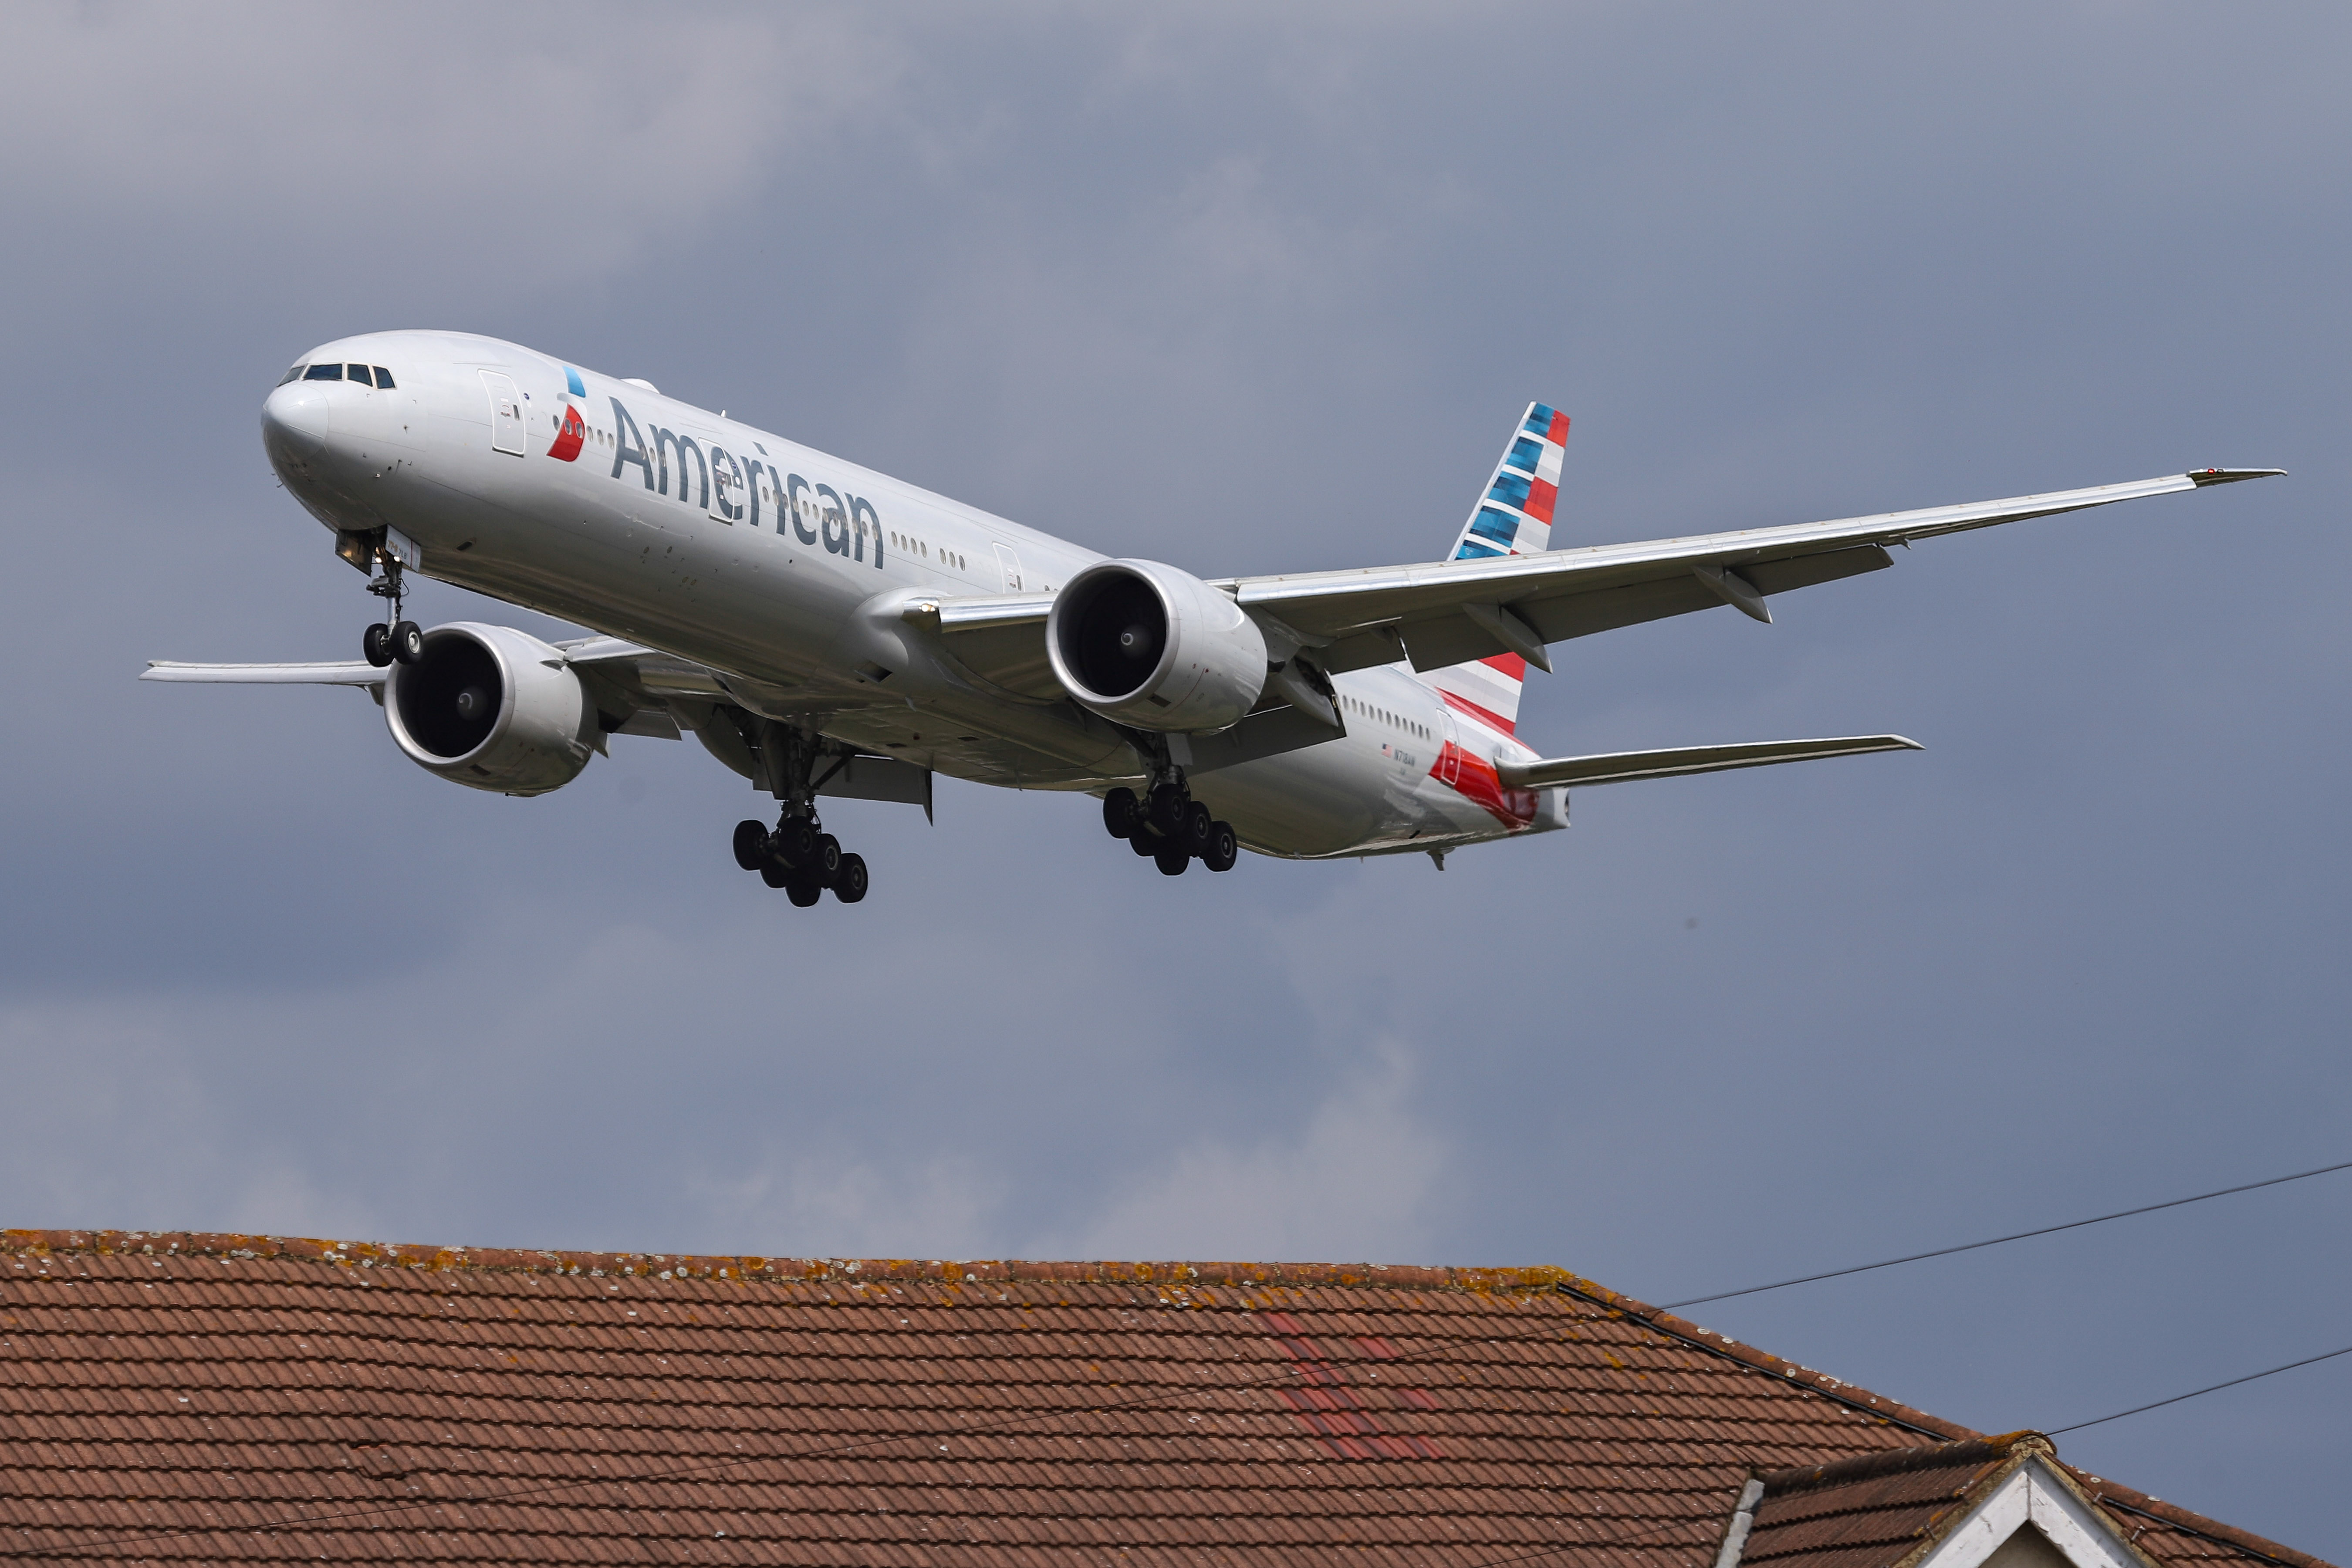 American Airlines Boing 777 Landing At London Heathrow